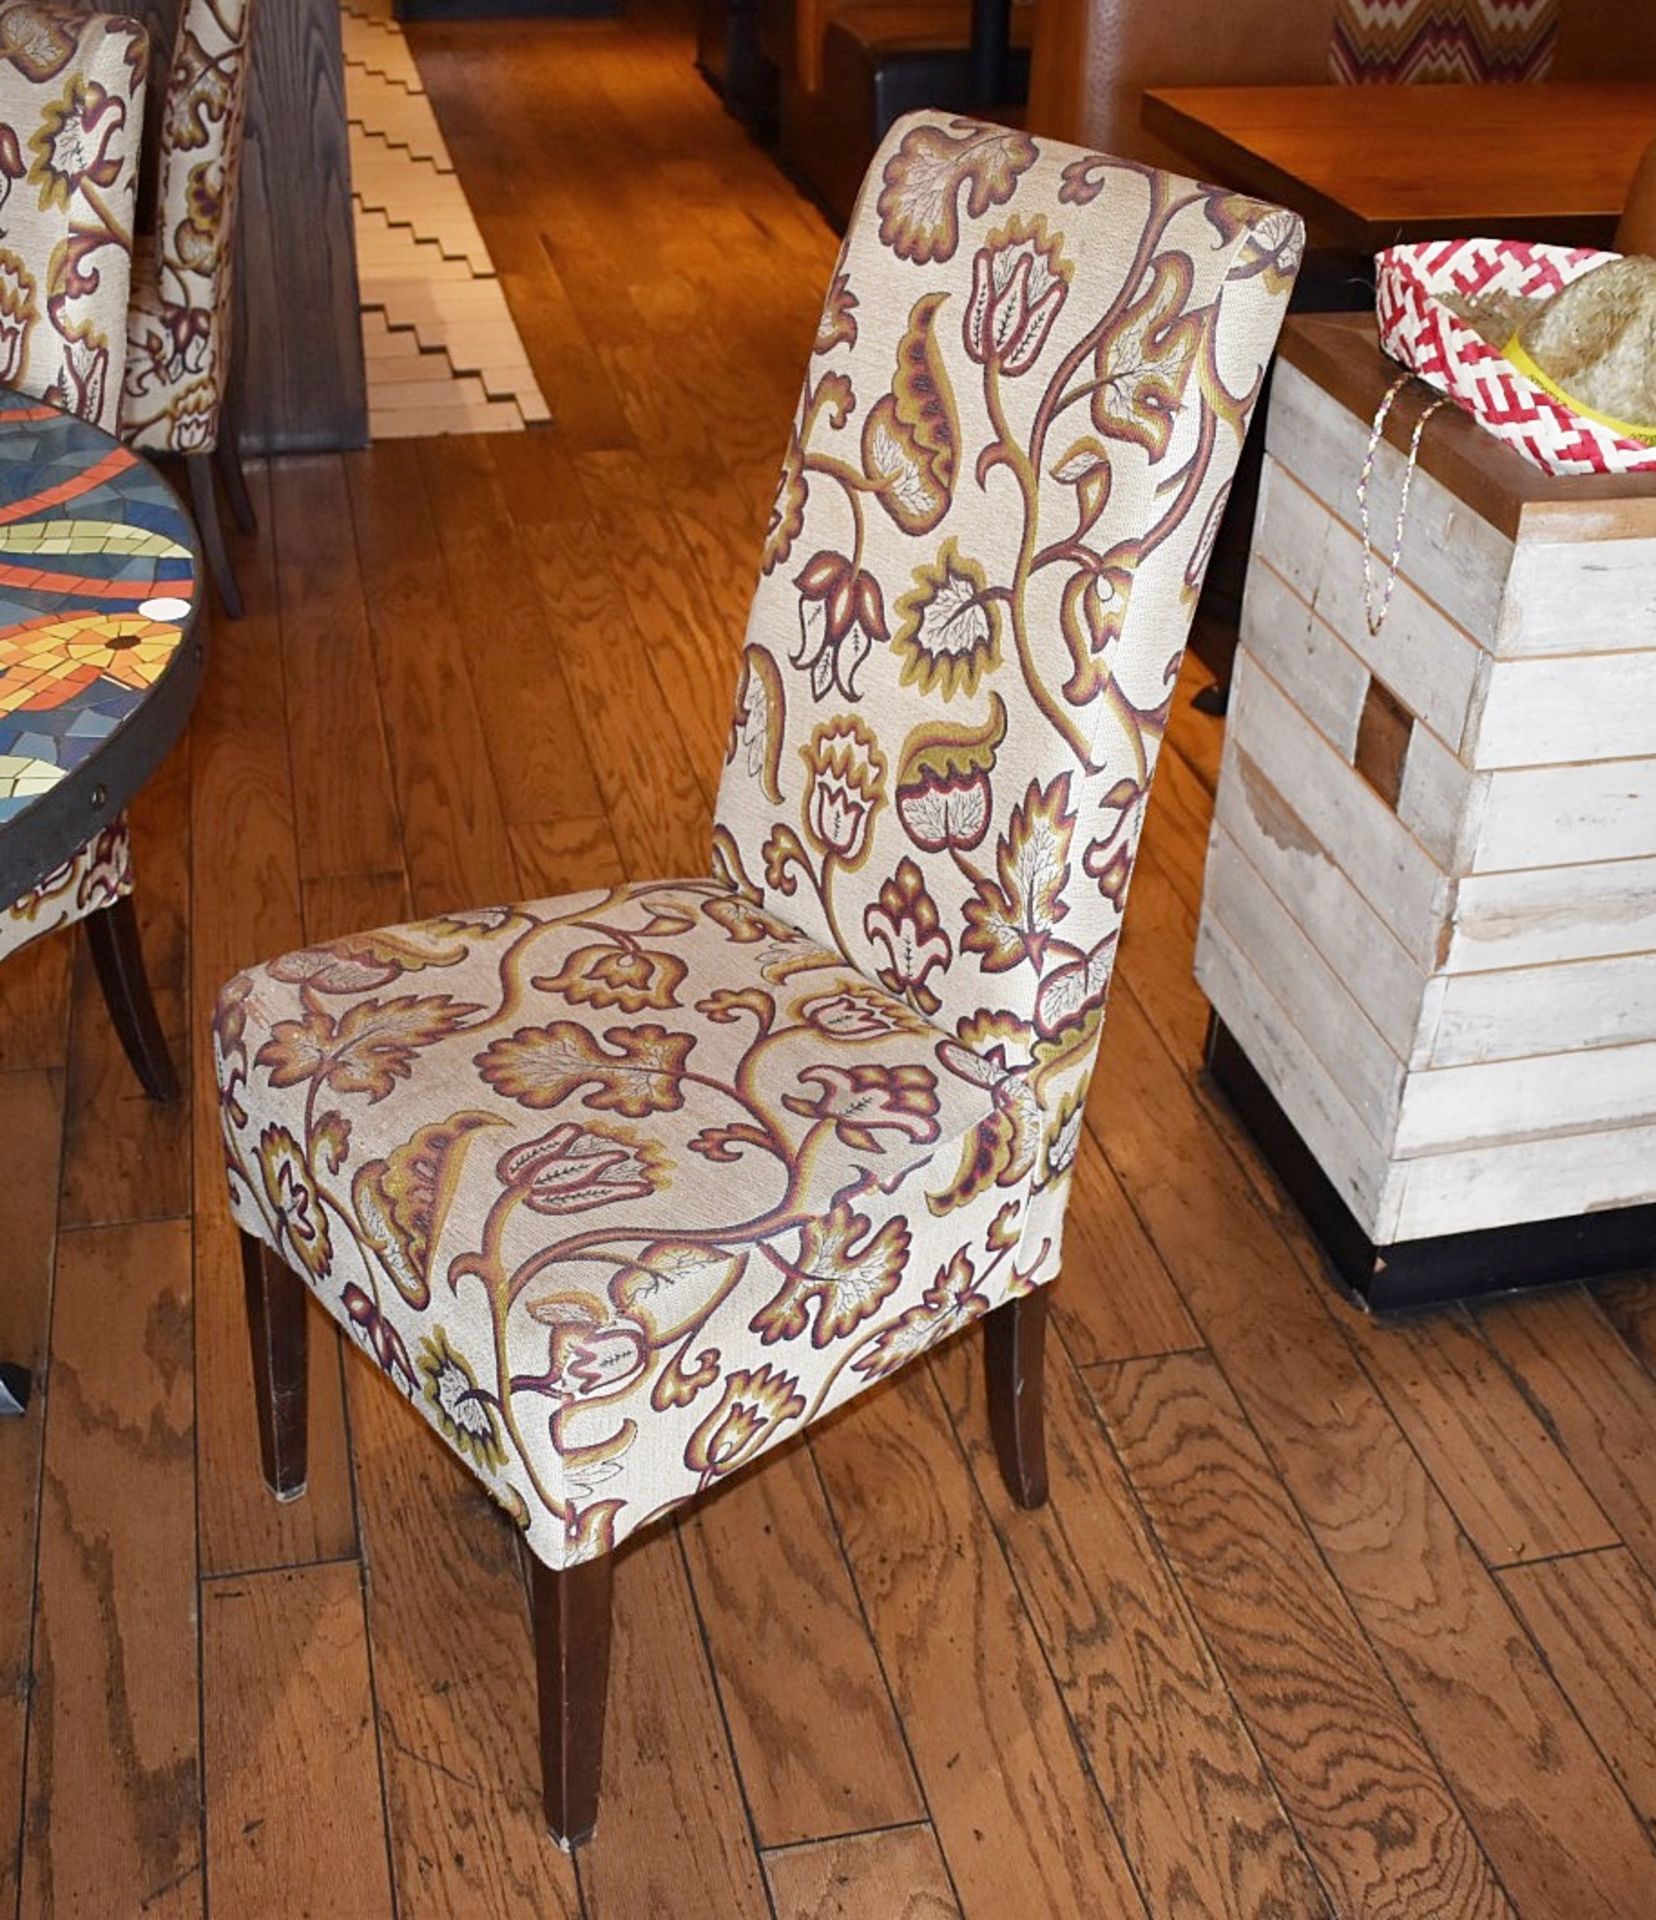 6 x Upholstered Restaurant Dining Chairs In A Floral Mexican-style Fabric - H95 x 40 x 40cm